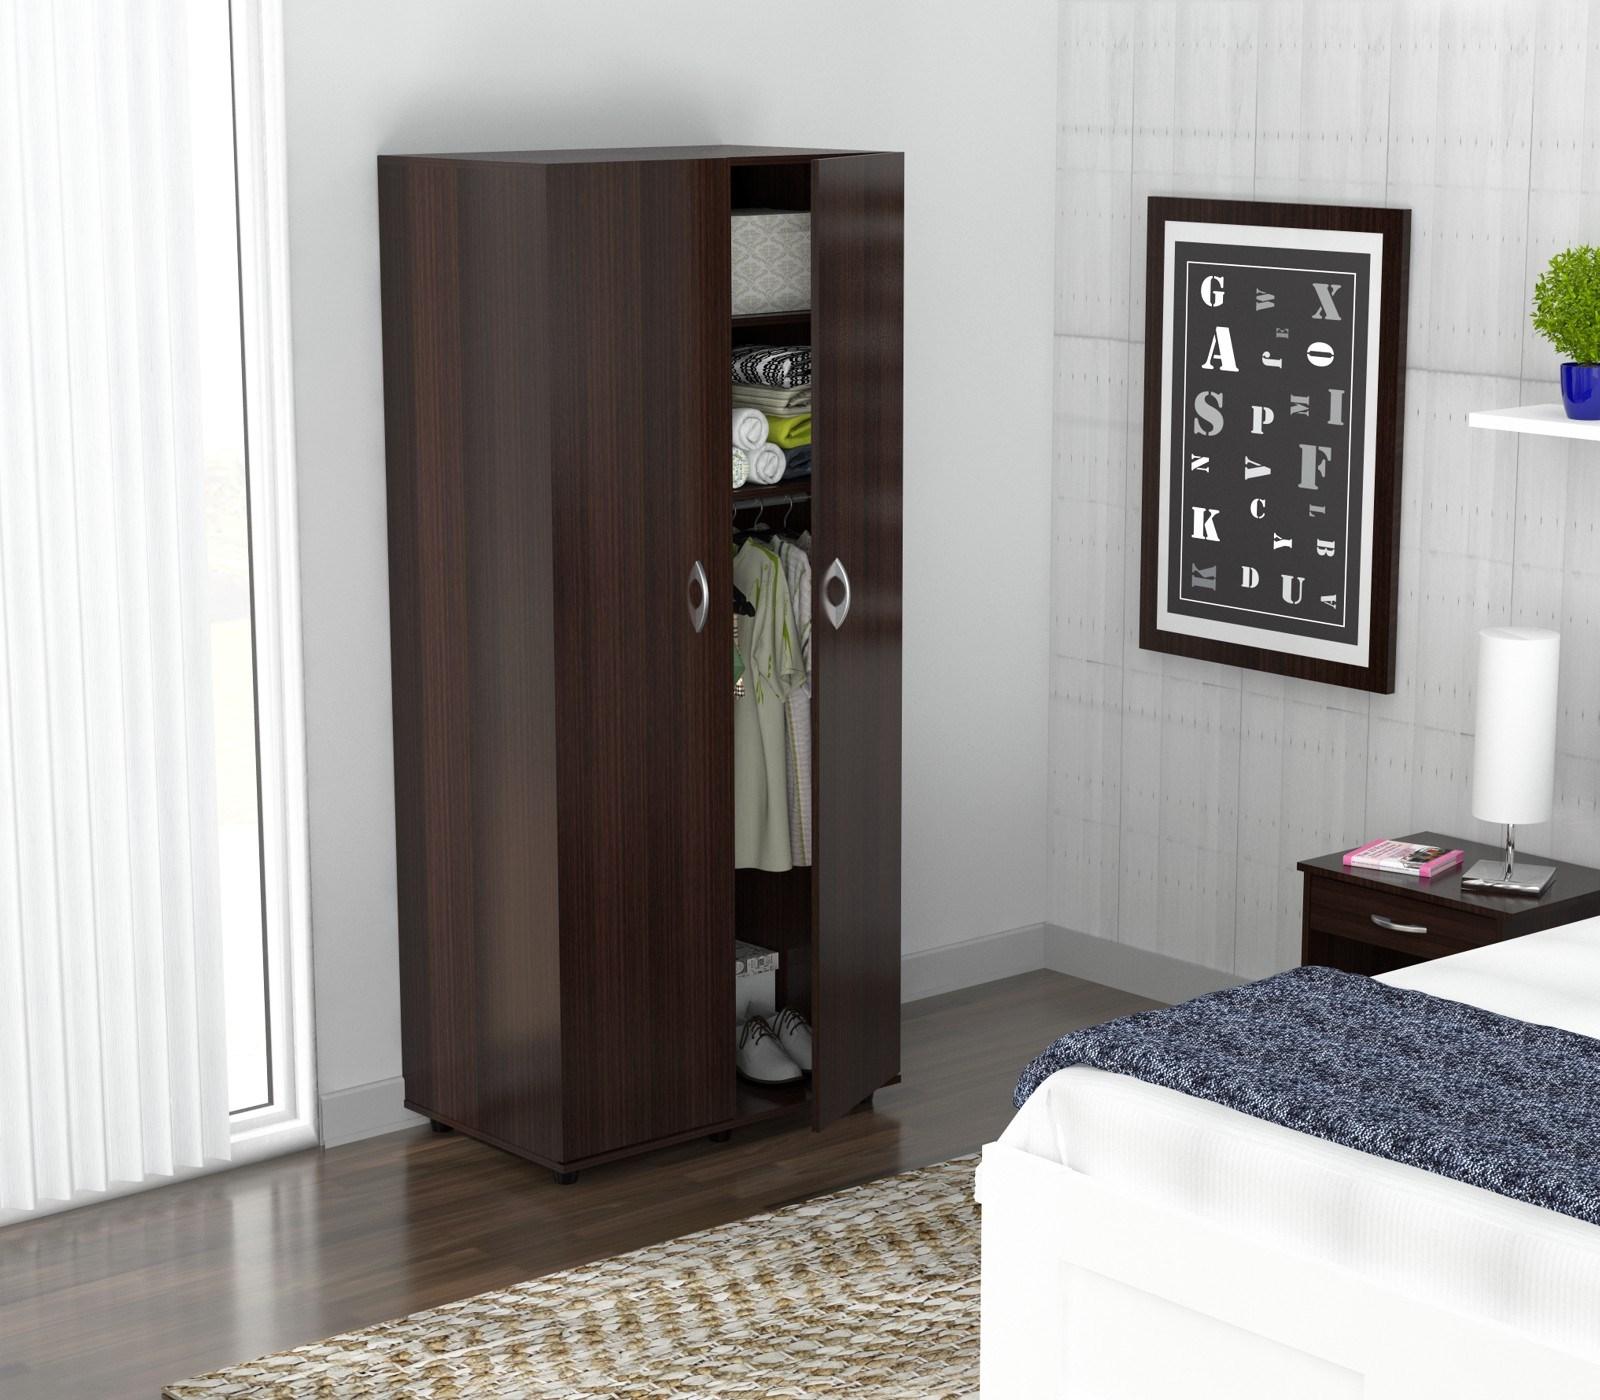 Espresso Finish Wood Wardrobe with Two Doors